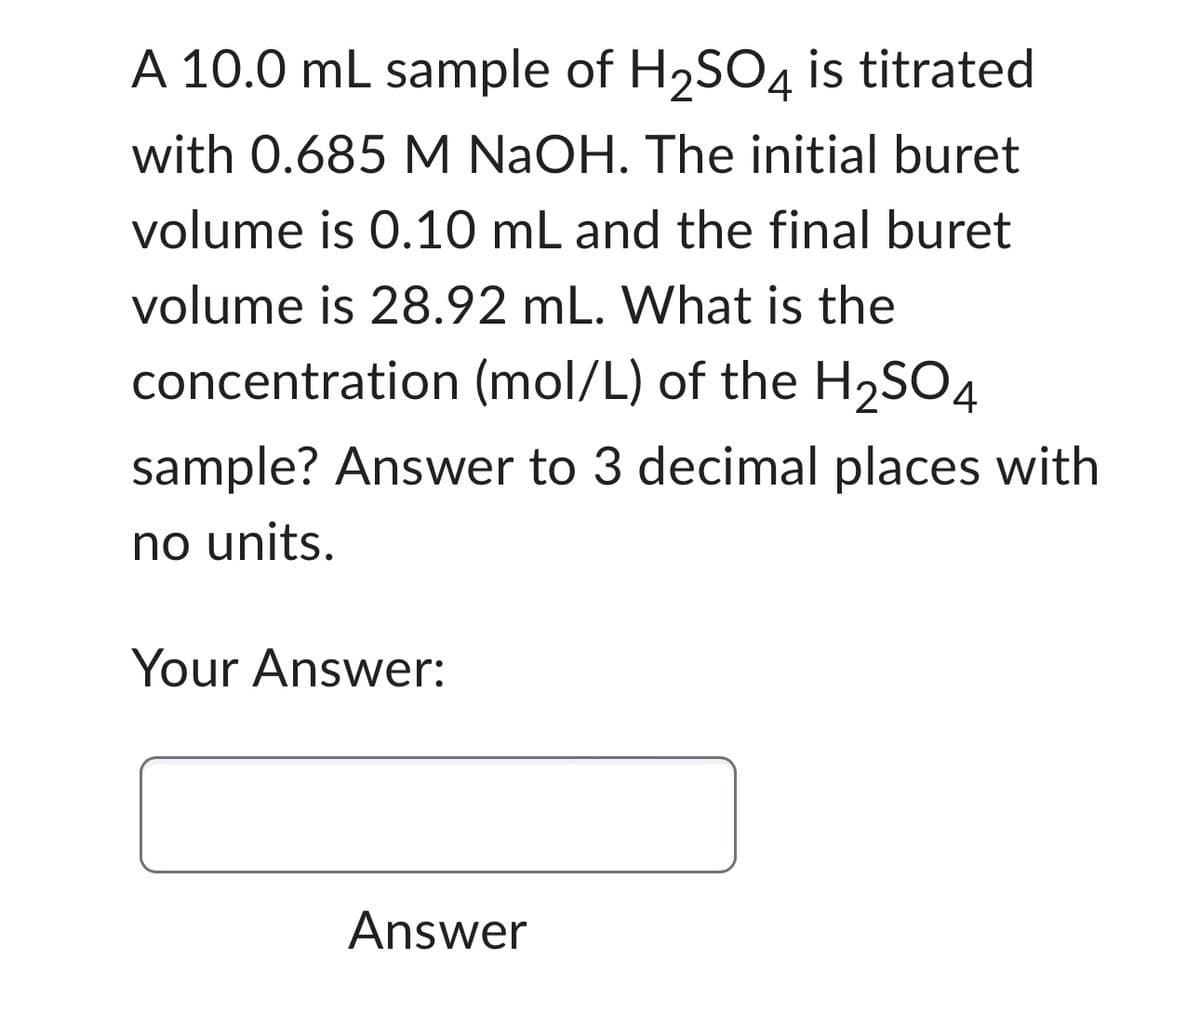 A 10.0 mL sample of H₂SO4 is titrated
with 0.685 M NaOH. The initial buret
volume is 0.10 mL and the final buret
volume is 28.92 mL. What is the
concentration (mol/L) of the H₂SO4
sample? Answer to 3 decimal places with
no units.
Your Answer:
Answer